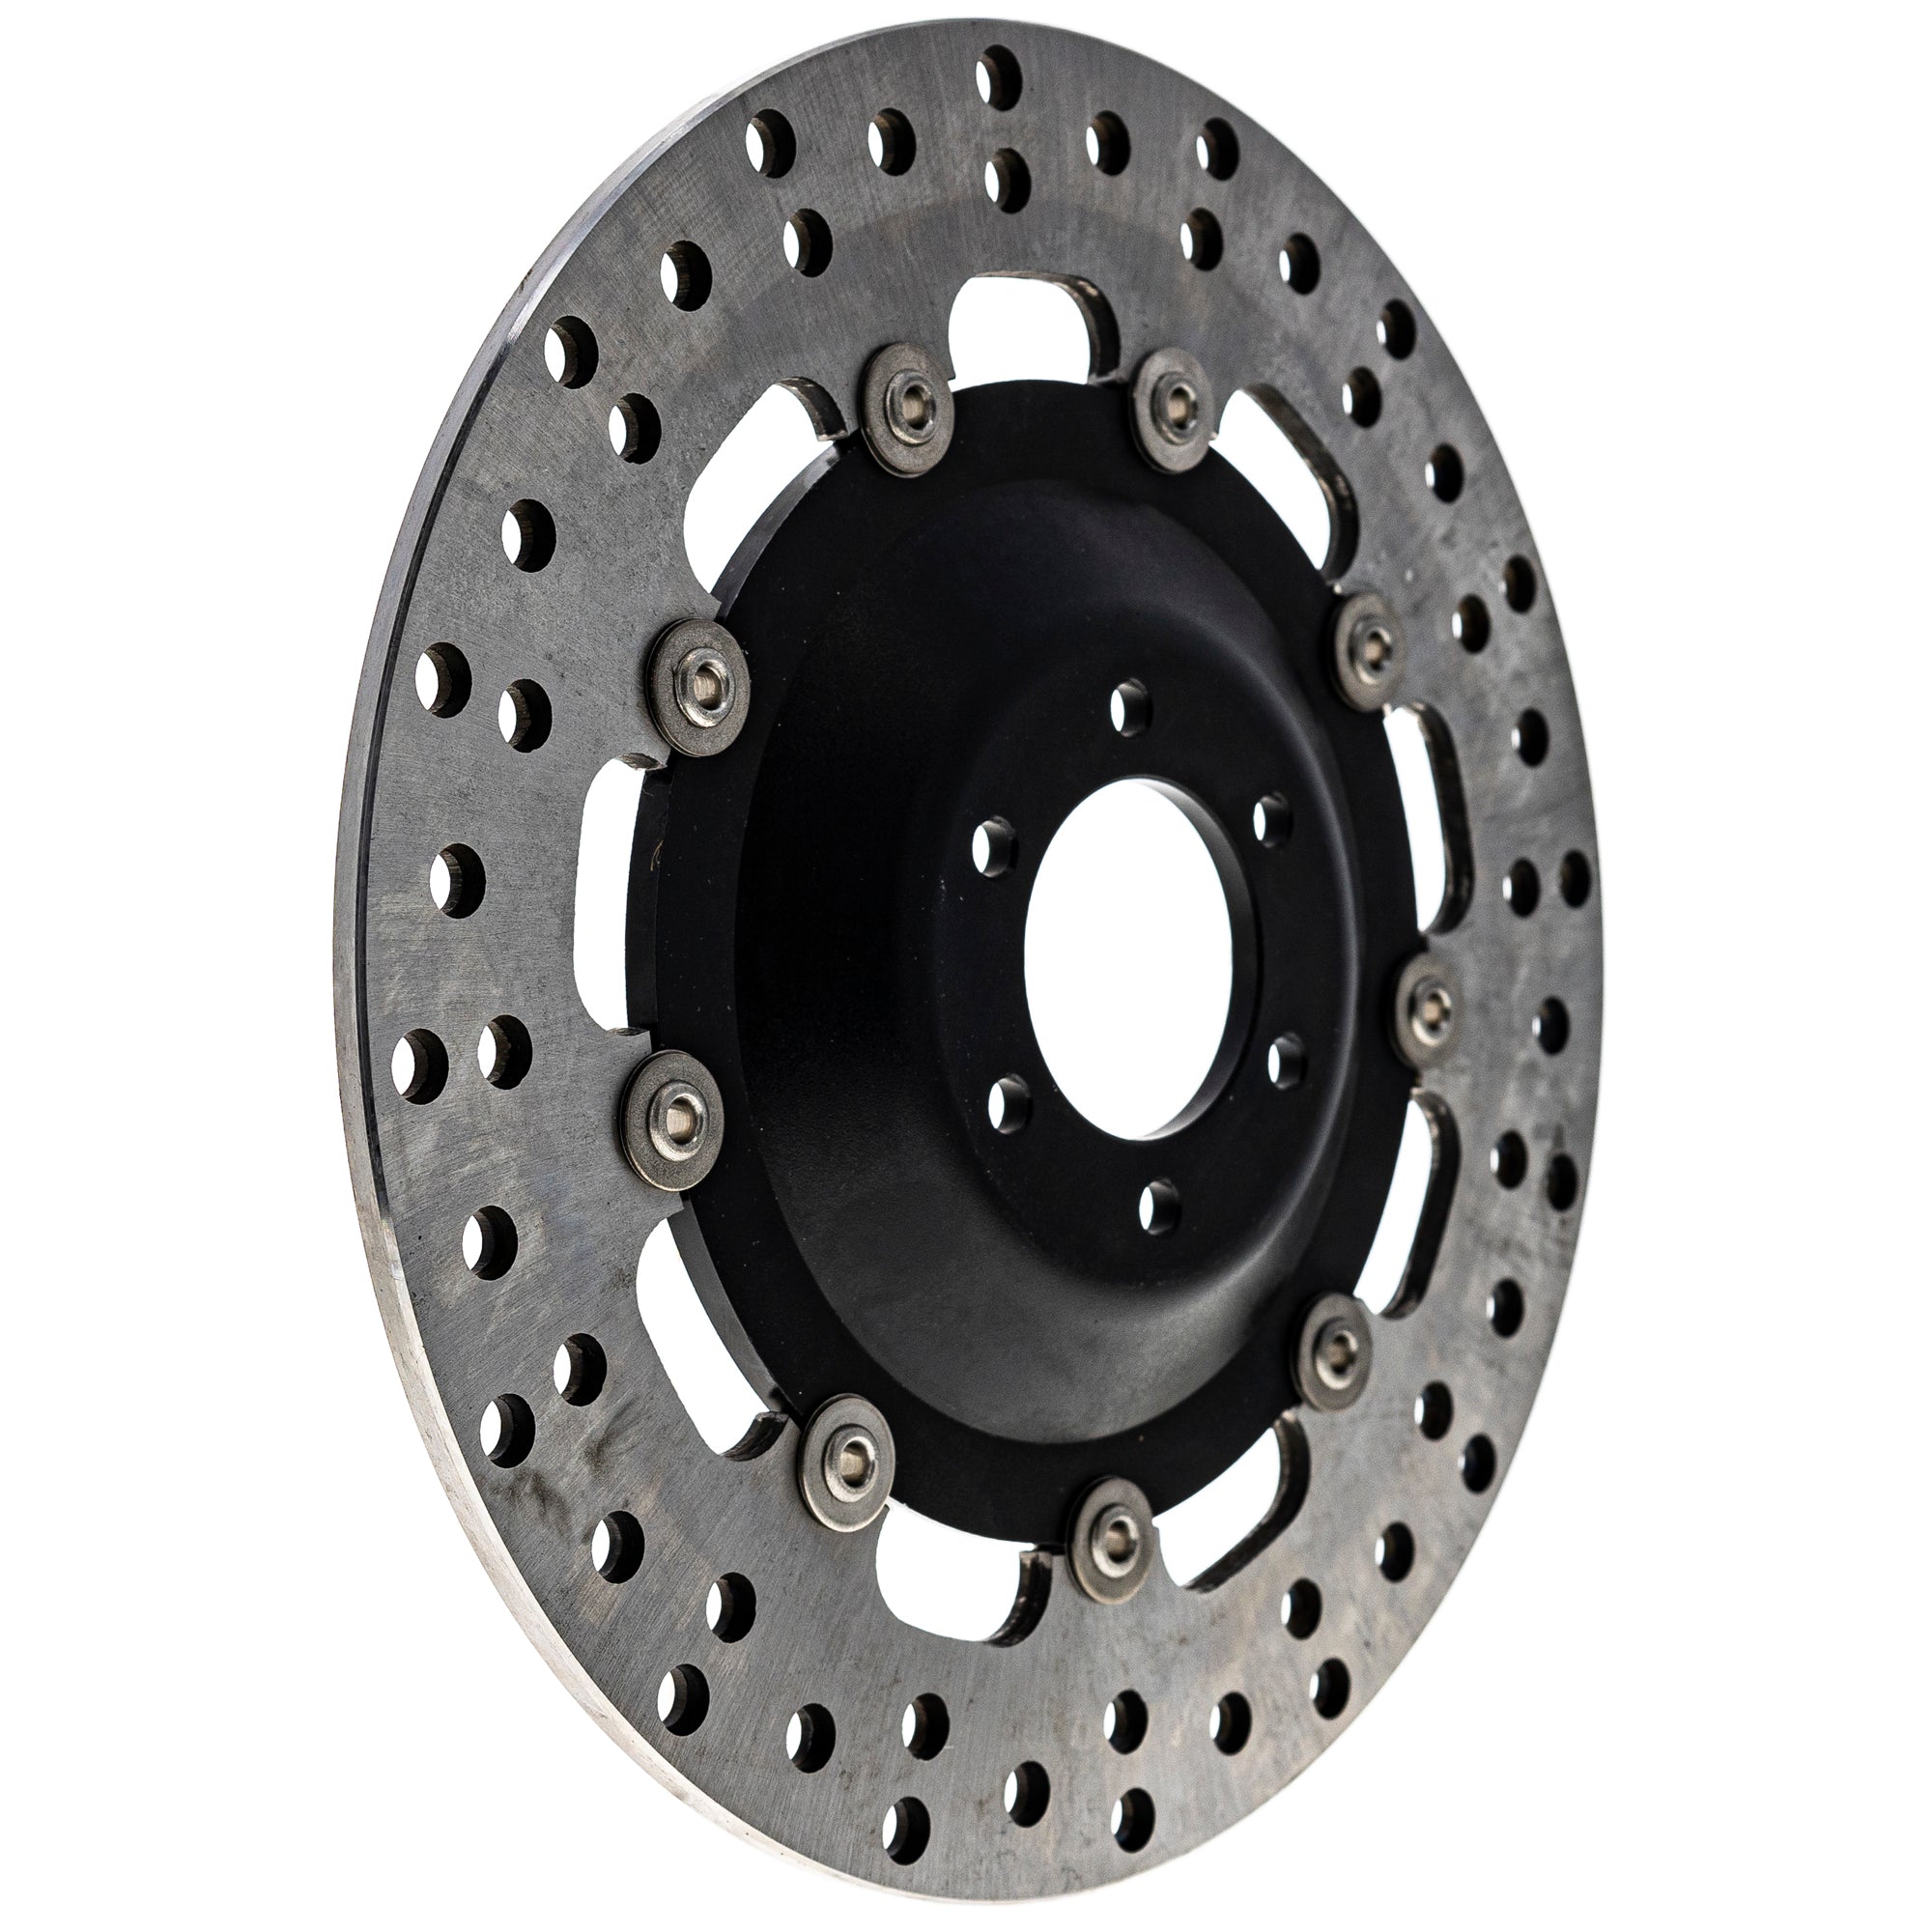 Front Brake Rotor for Yamaha GS750 GS550 GS1000 GS550E 59210-37001 2